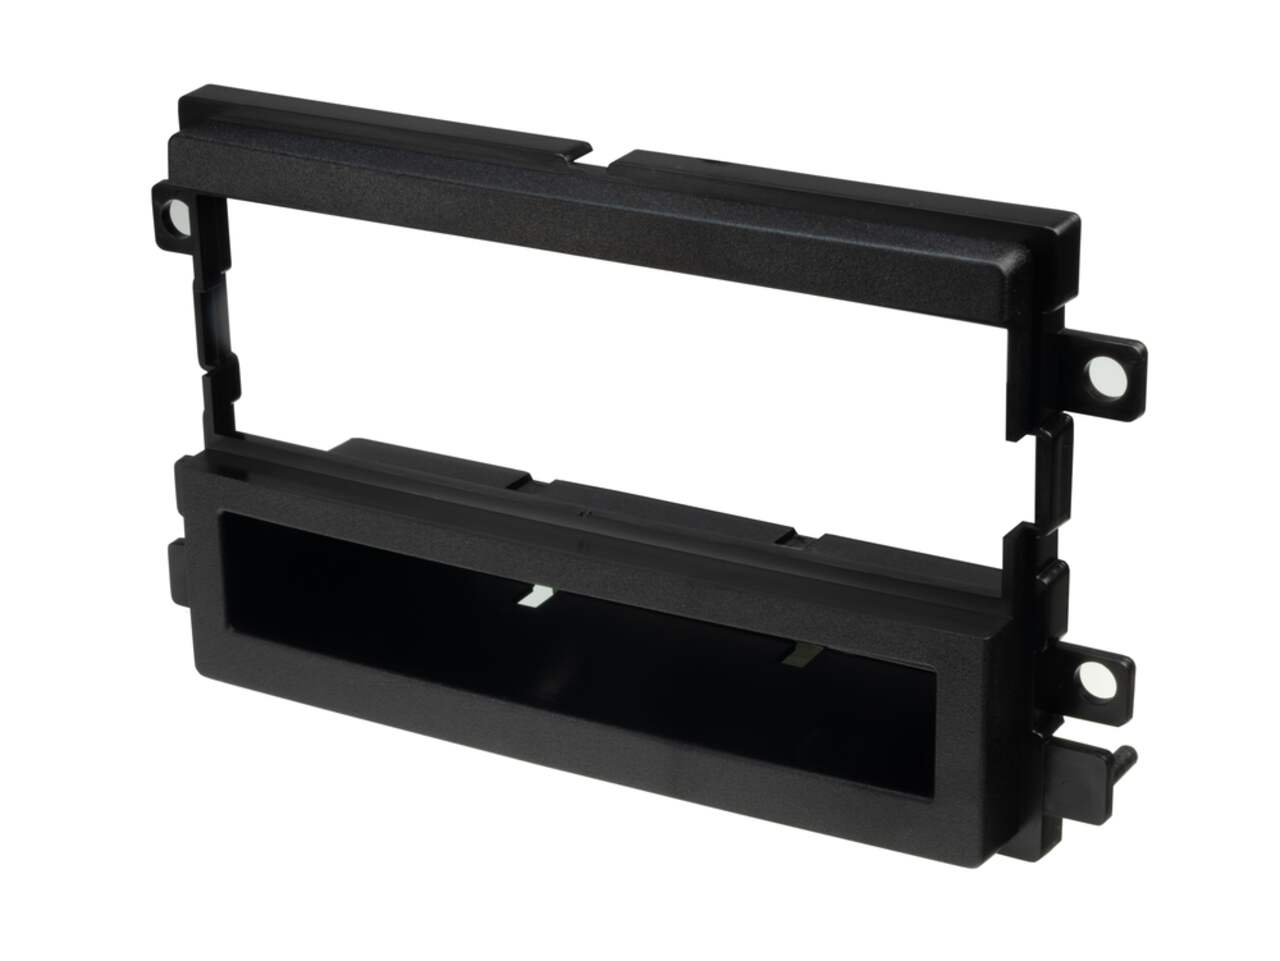 Scosche Dash Double DIN Install Kit for 1995-2011 Ford, Lincoln